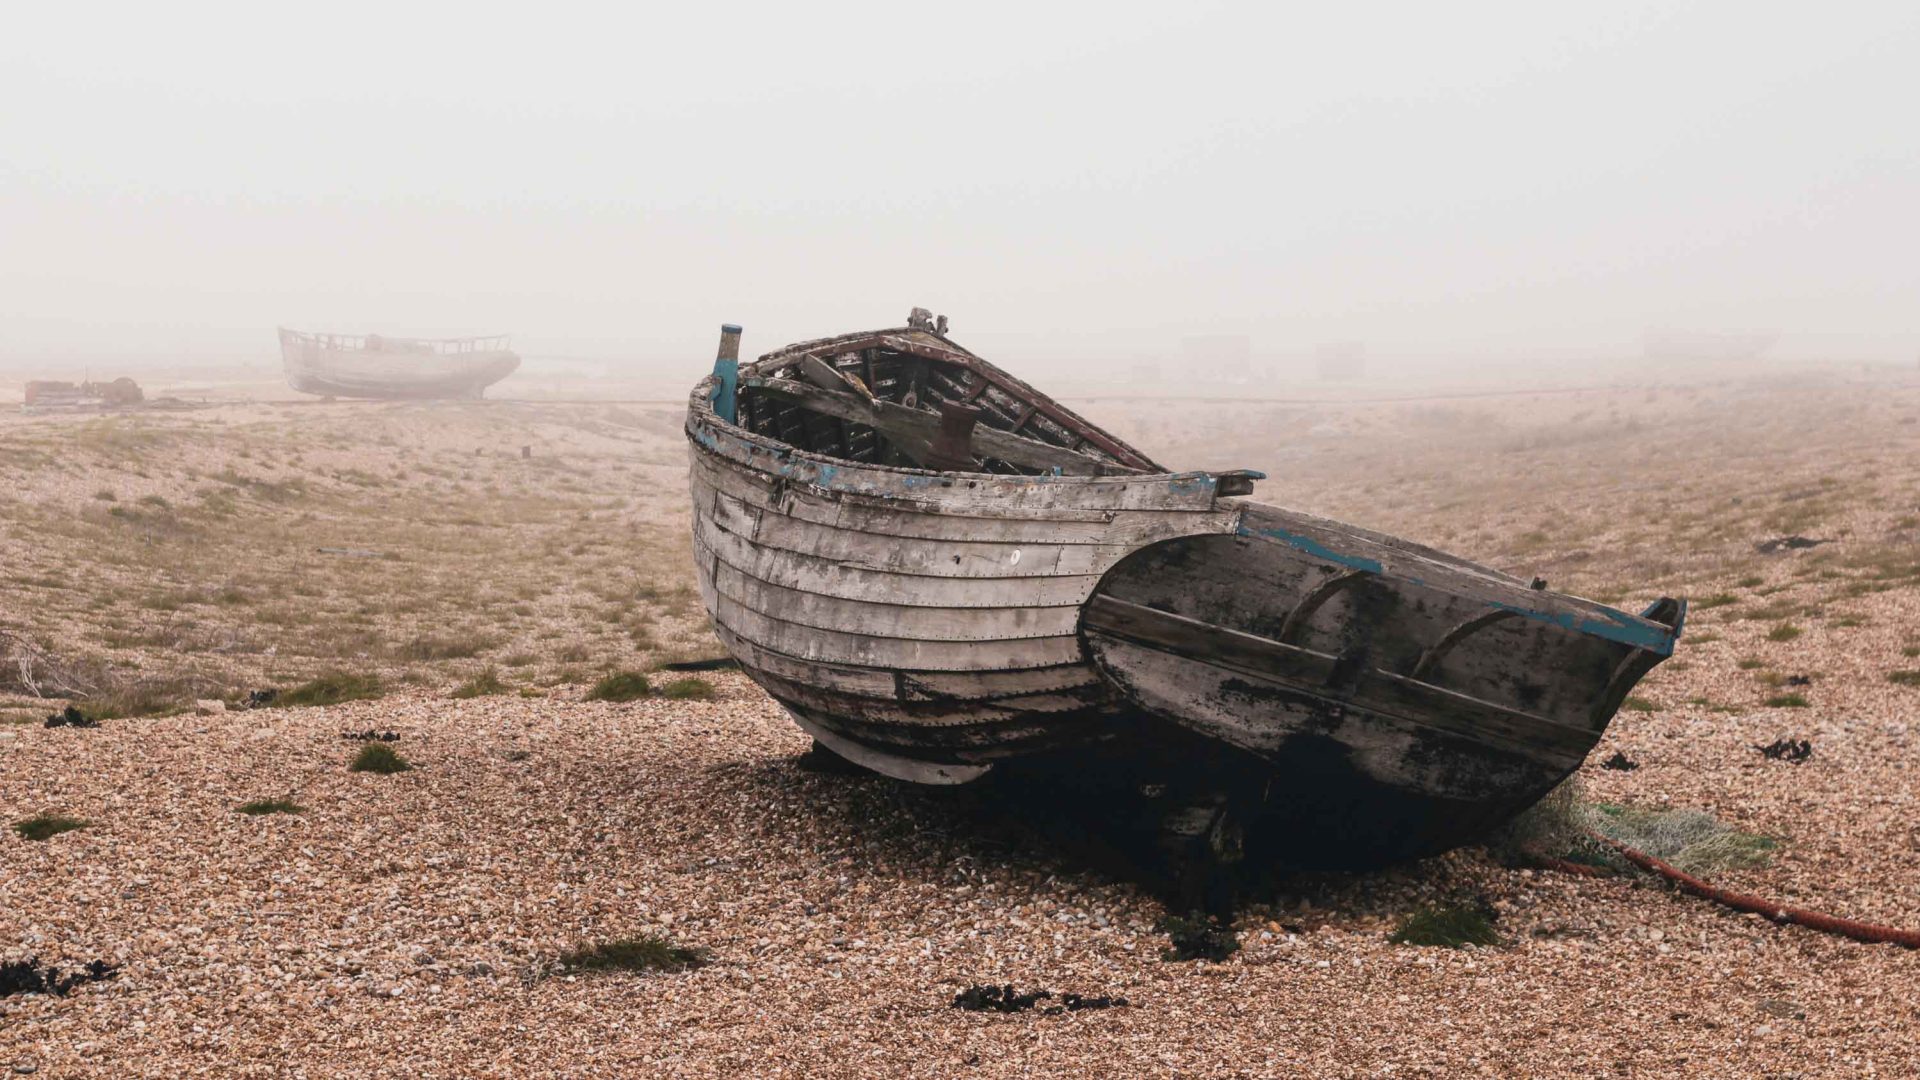 The ‘desert’ of Kent: What we can learn from the history of Britain’s forgotten beaches